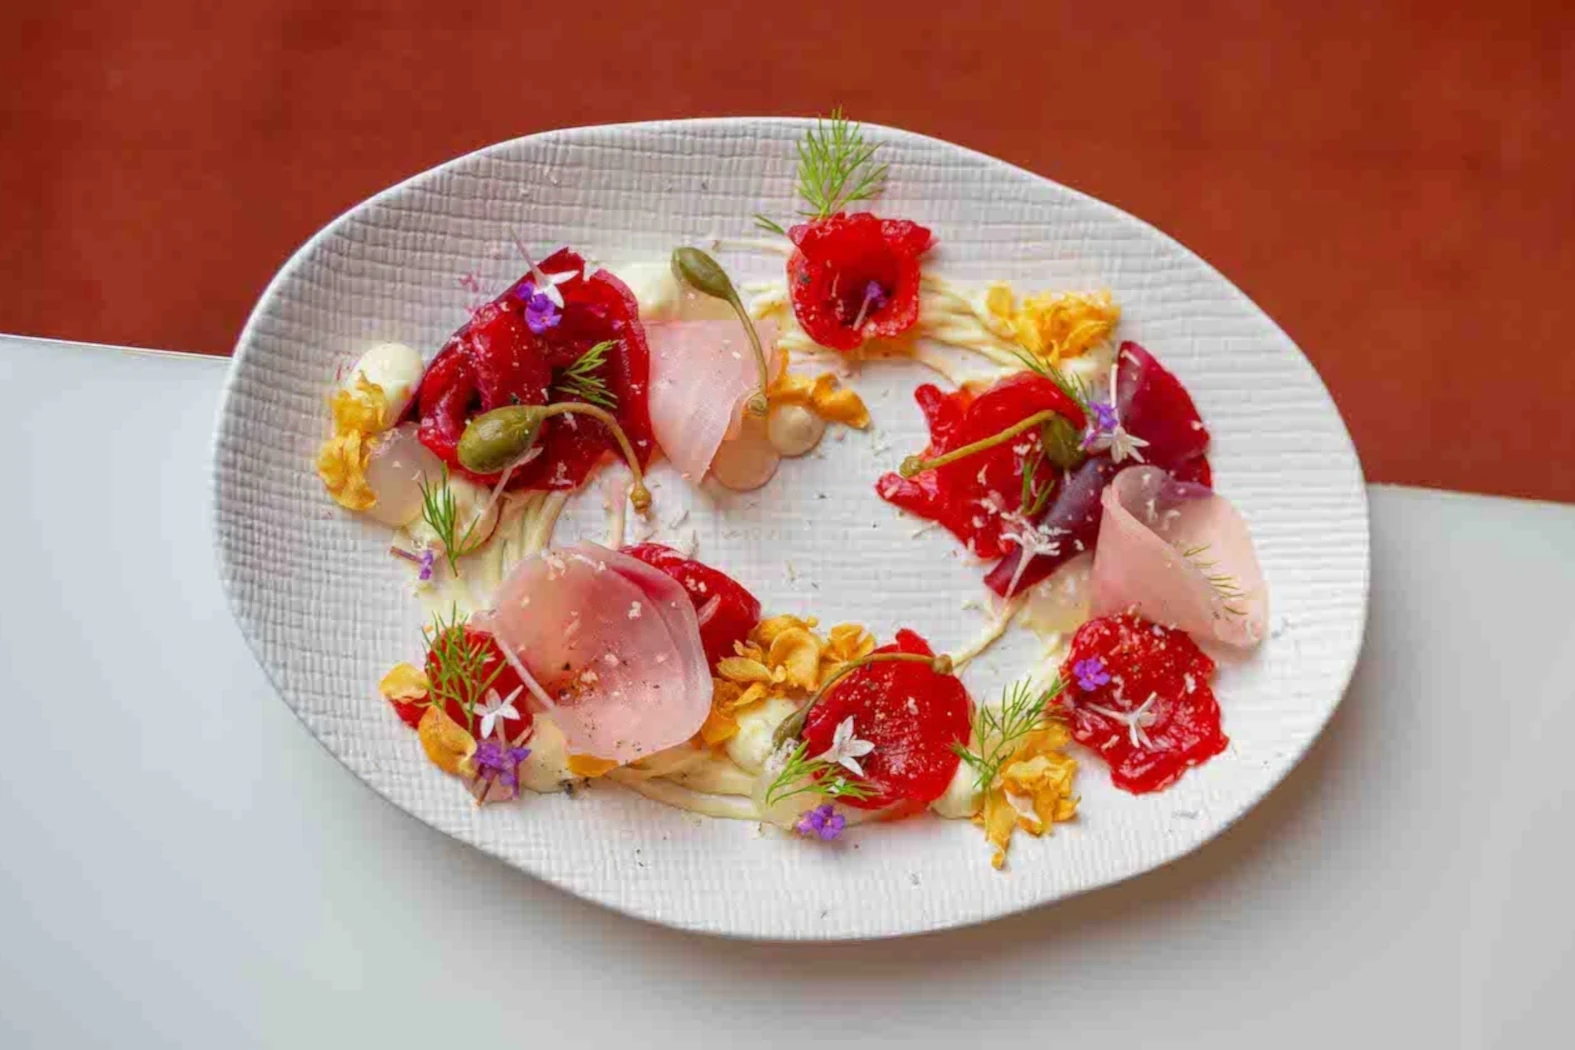 Fine dining plate at Patel Bangkok from their new menu from September 2023